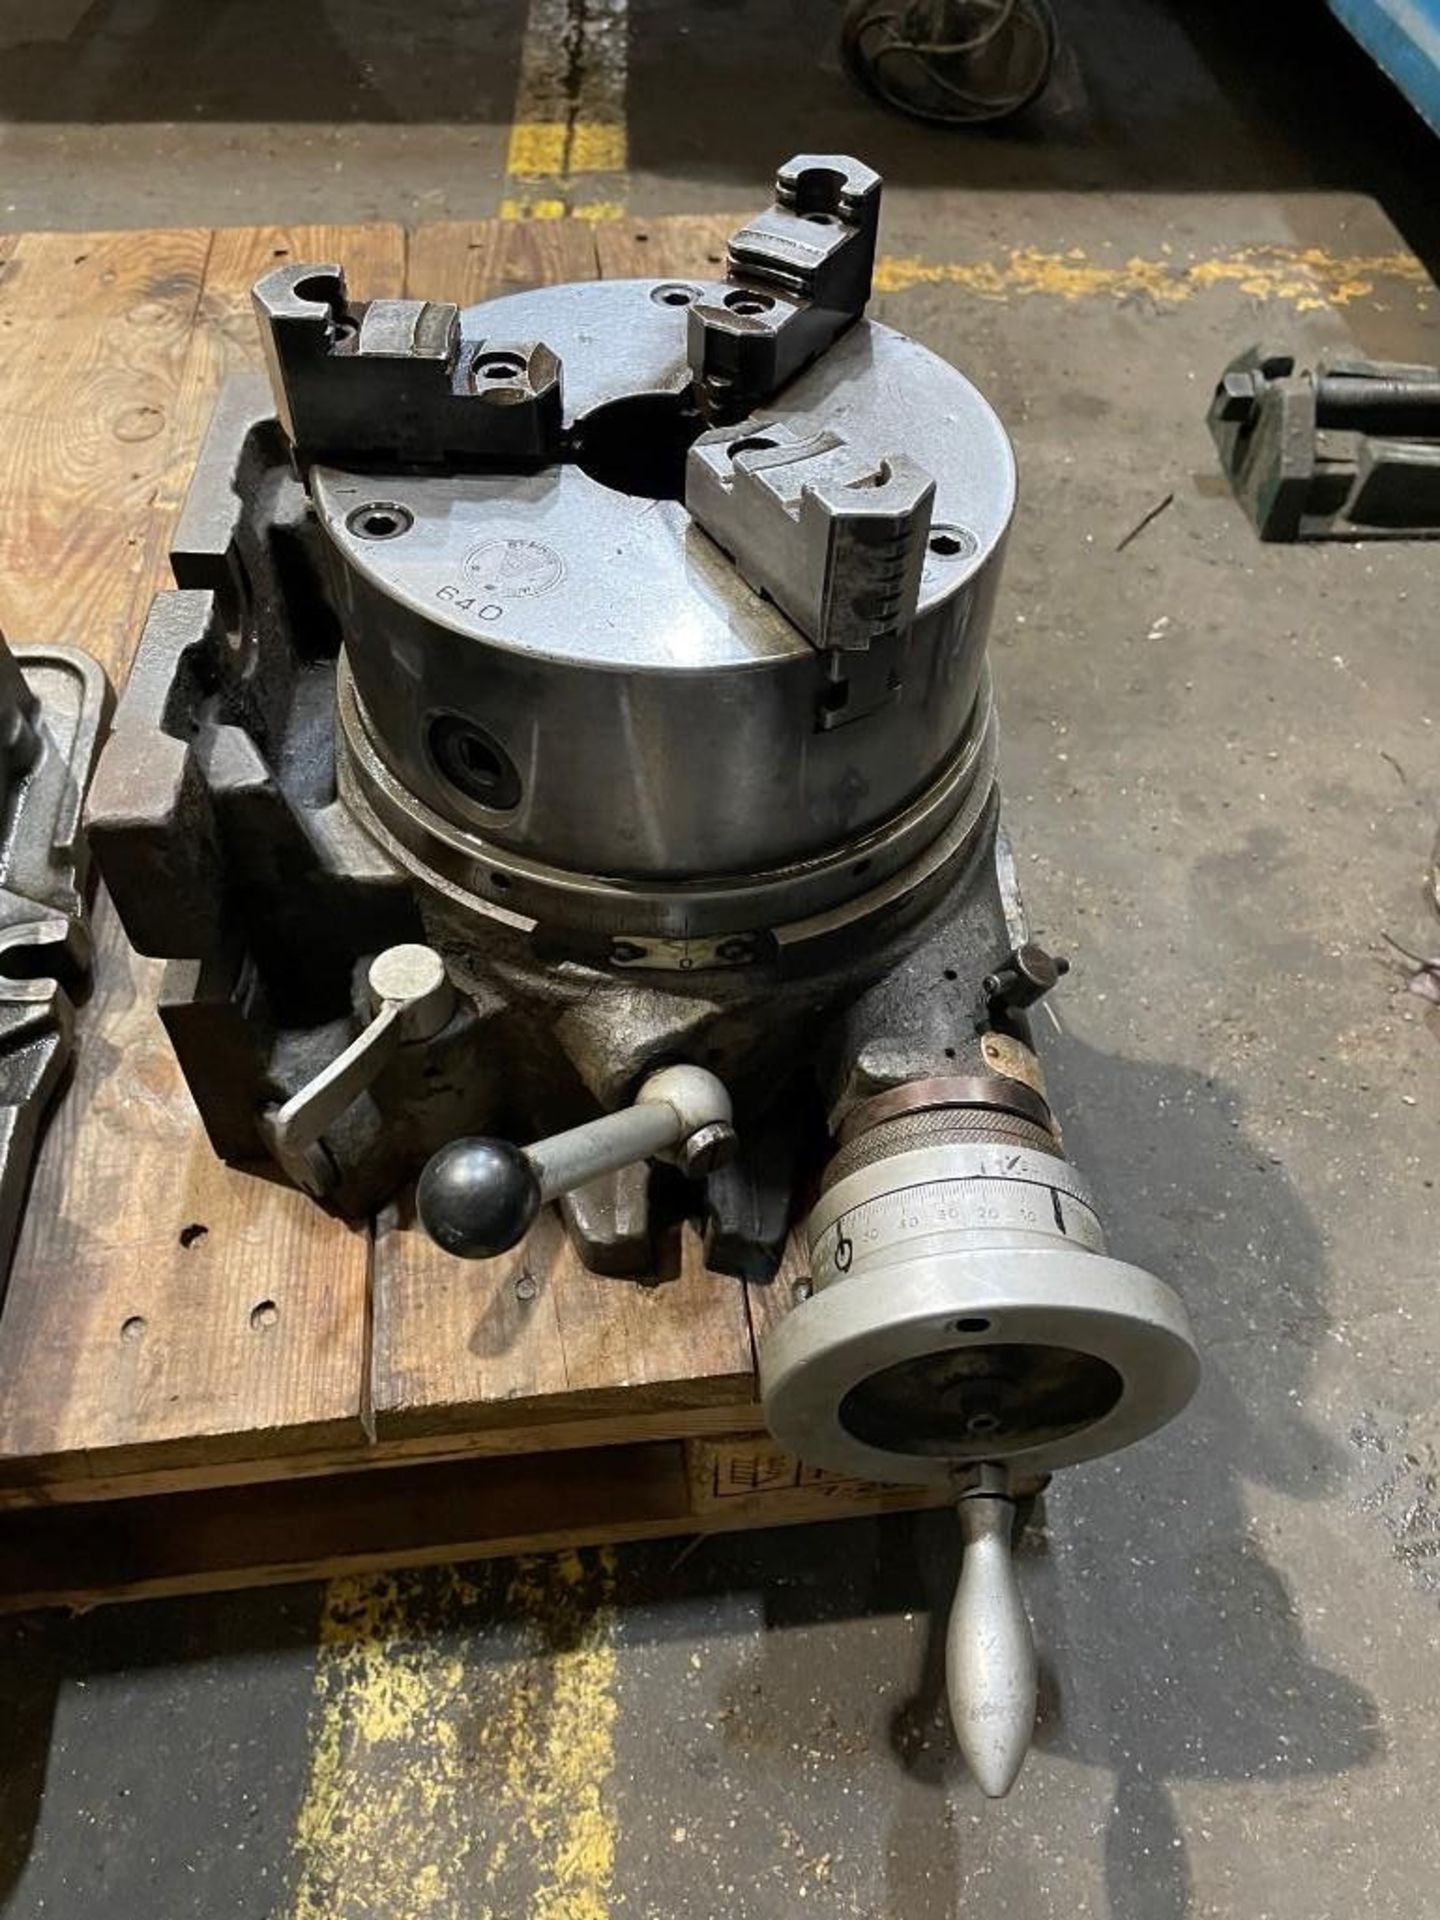 Rotary Table with 8" Strong 3-Jaw Chuck - See Photo